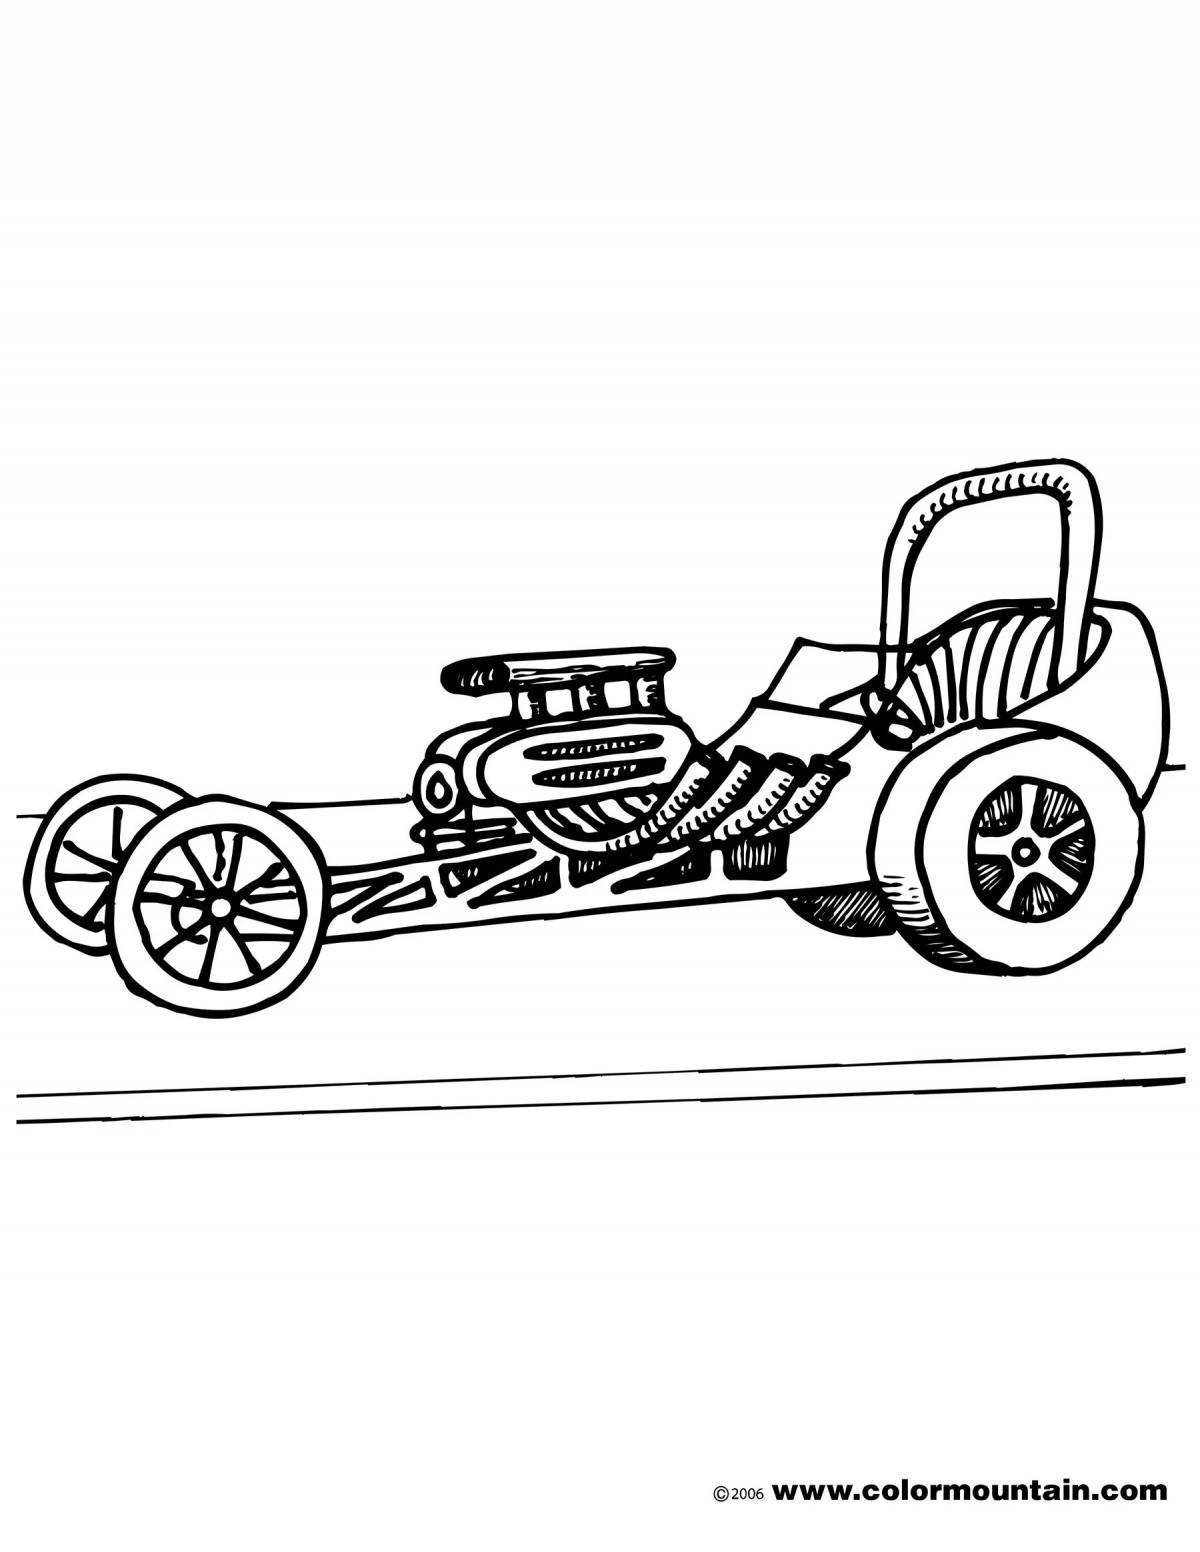 Coloring book shining dragster